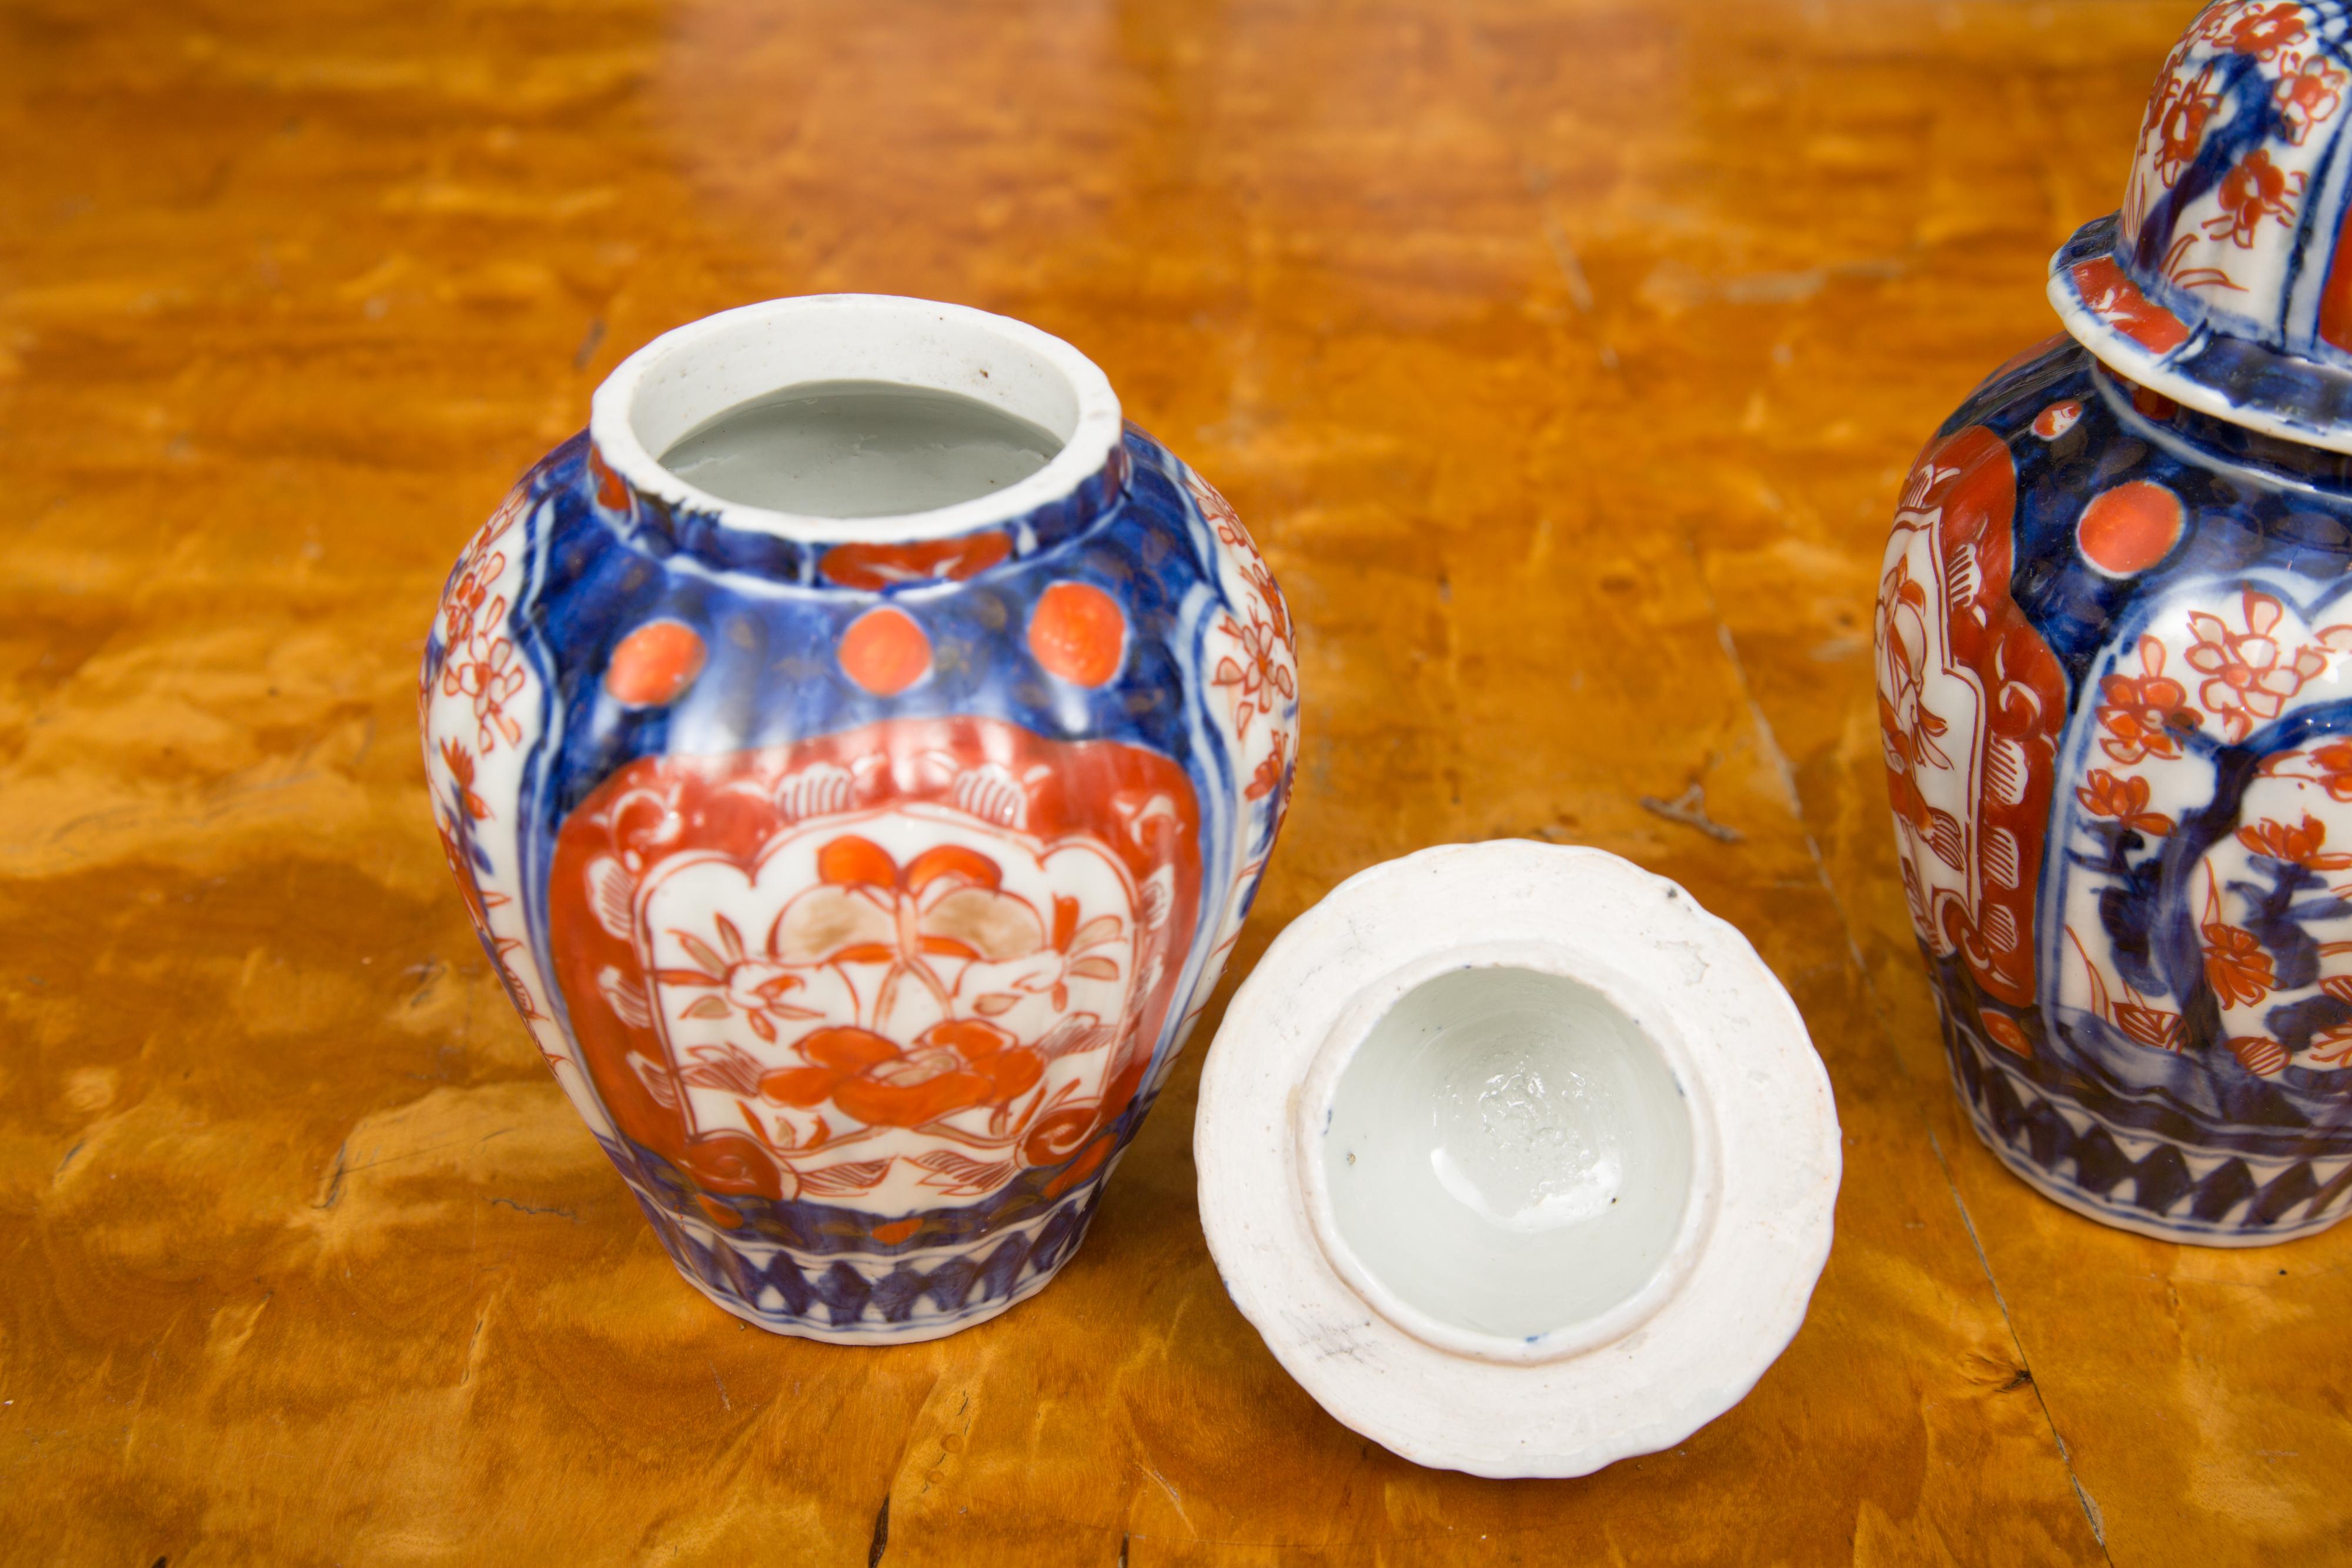 This is a very collectible pair of Classic Imari lidded urns, in traditional colors of cobalt blue and bittersweet orange, circa 1860.